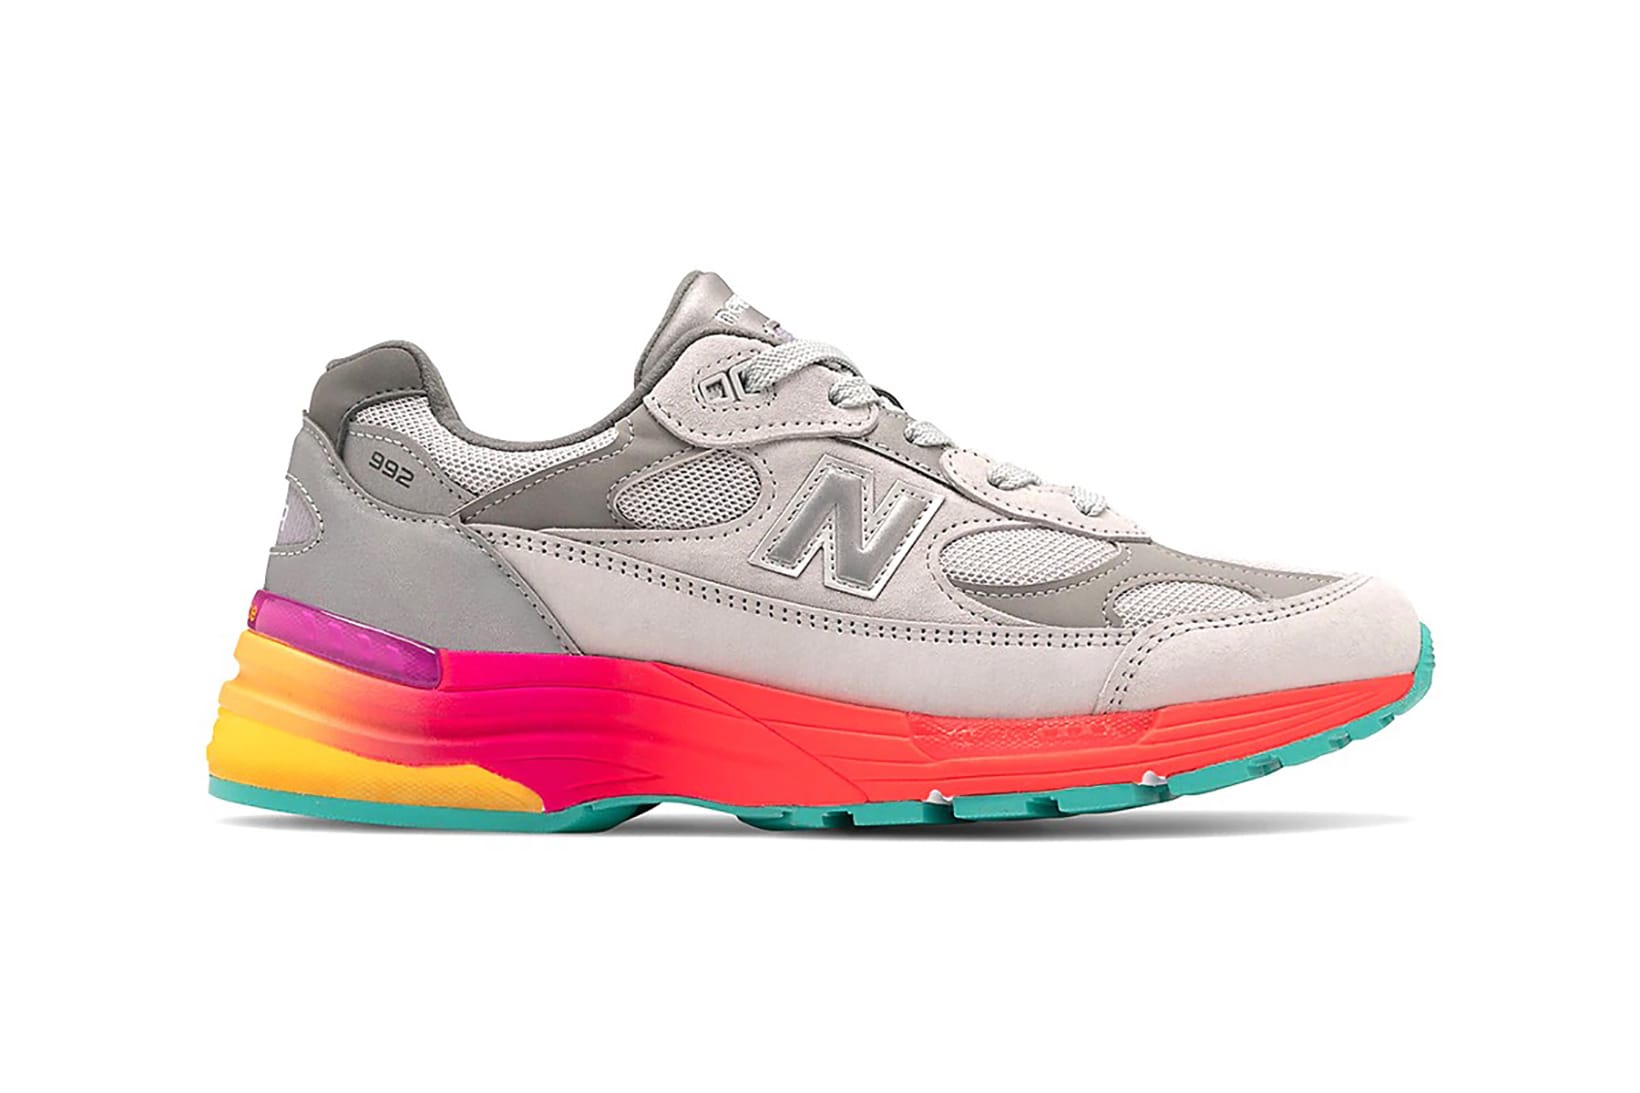 new balance women's multi colored sneakers